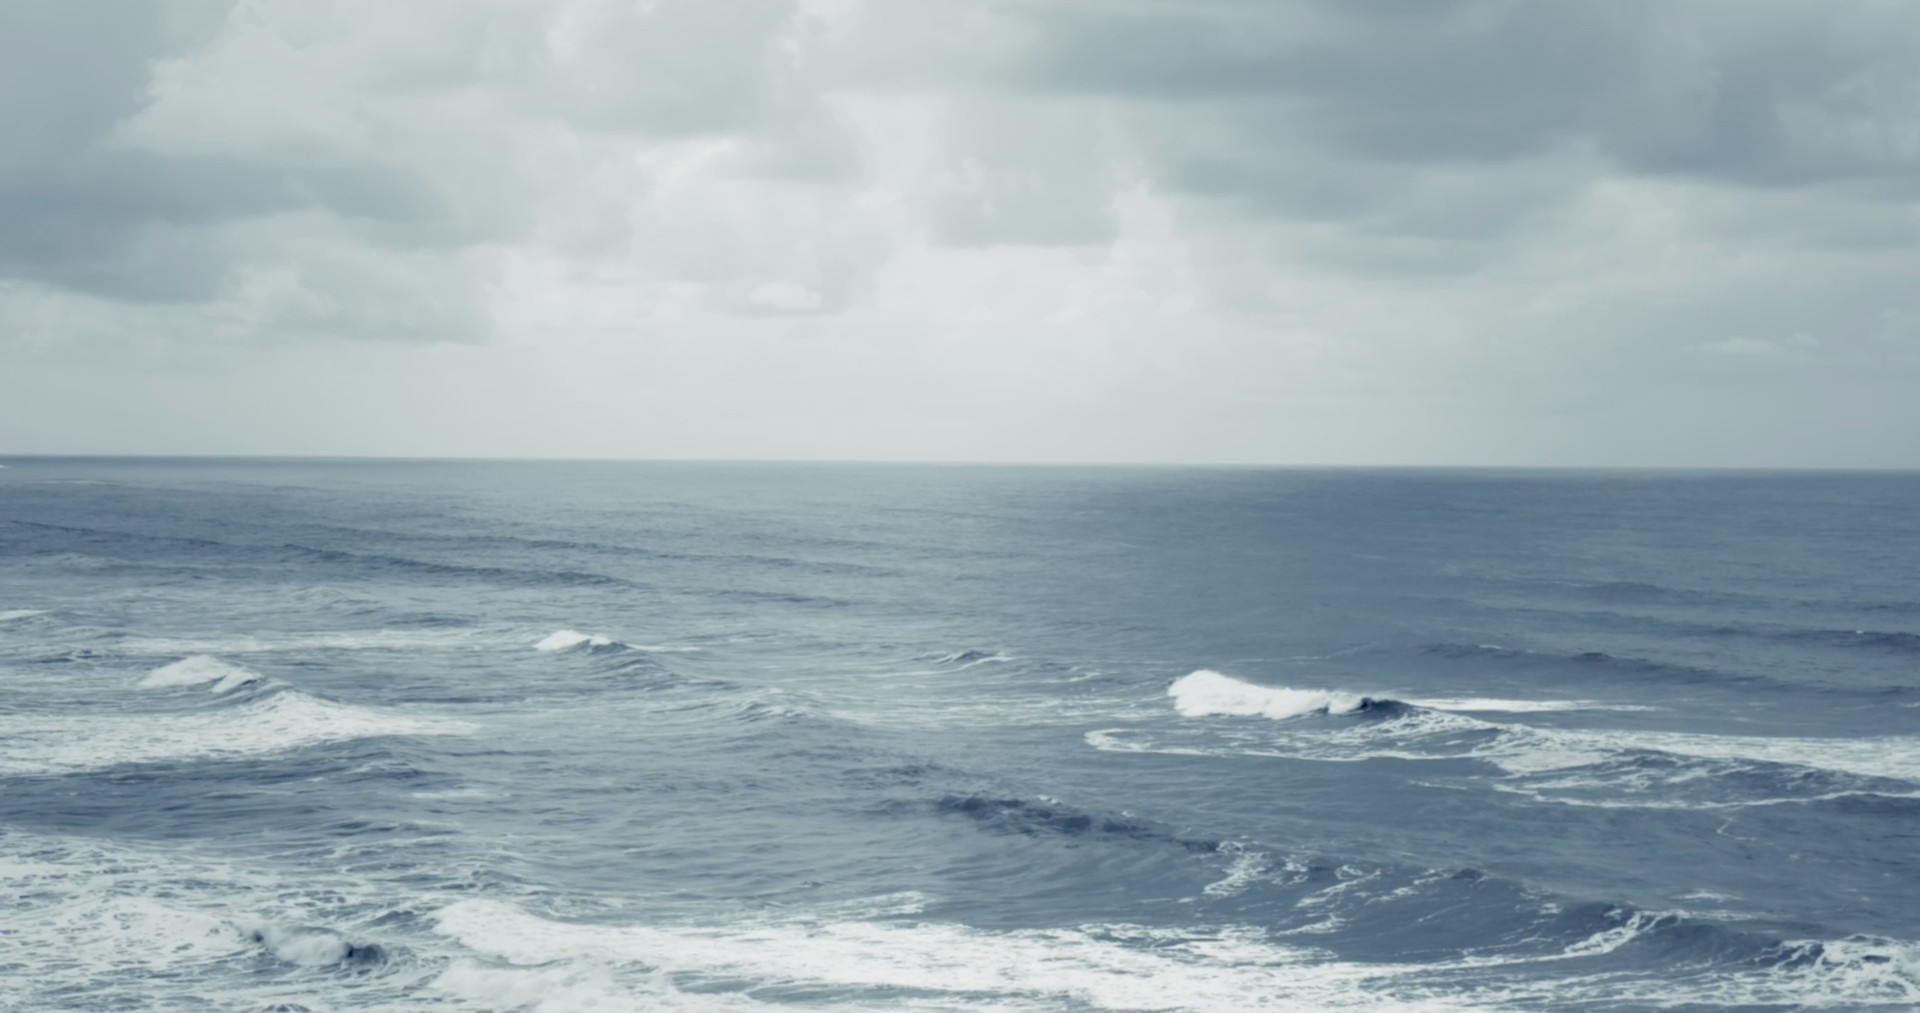 Still from the film małni shows the ocean on a cloudy day. Waves can we seen rolling towards the shore as dark clouds gather above the water.